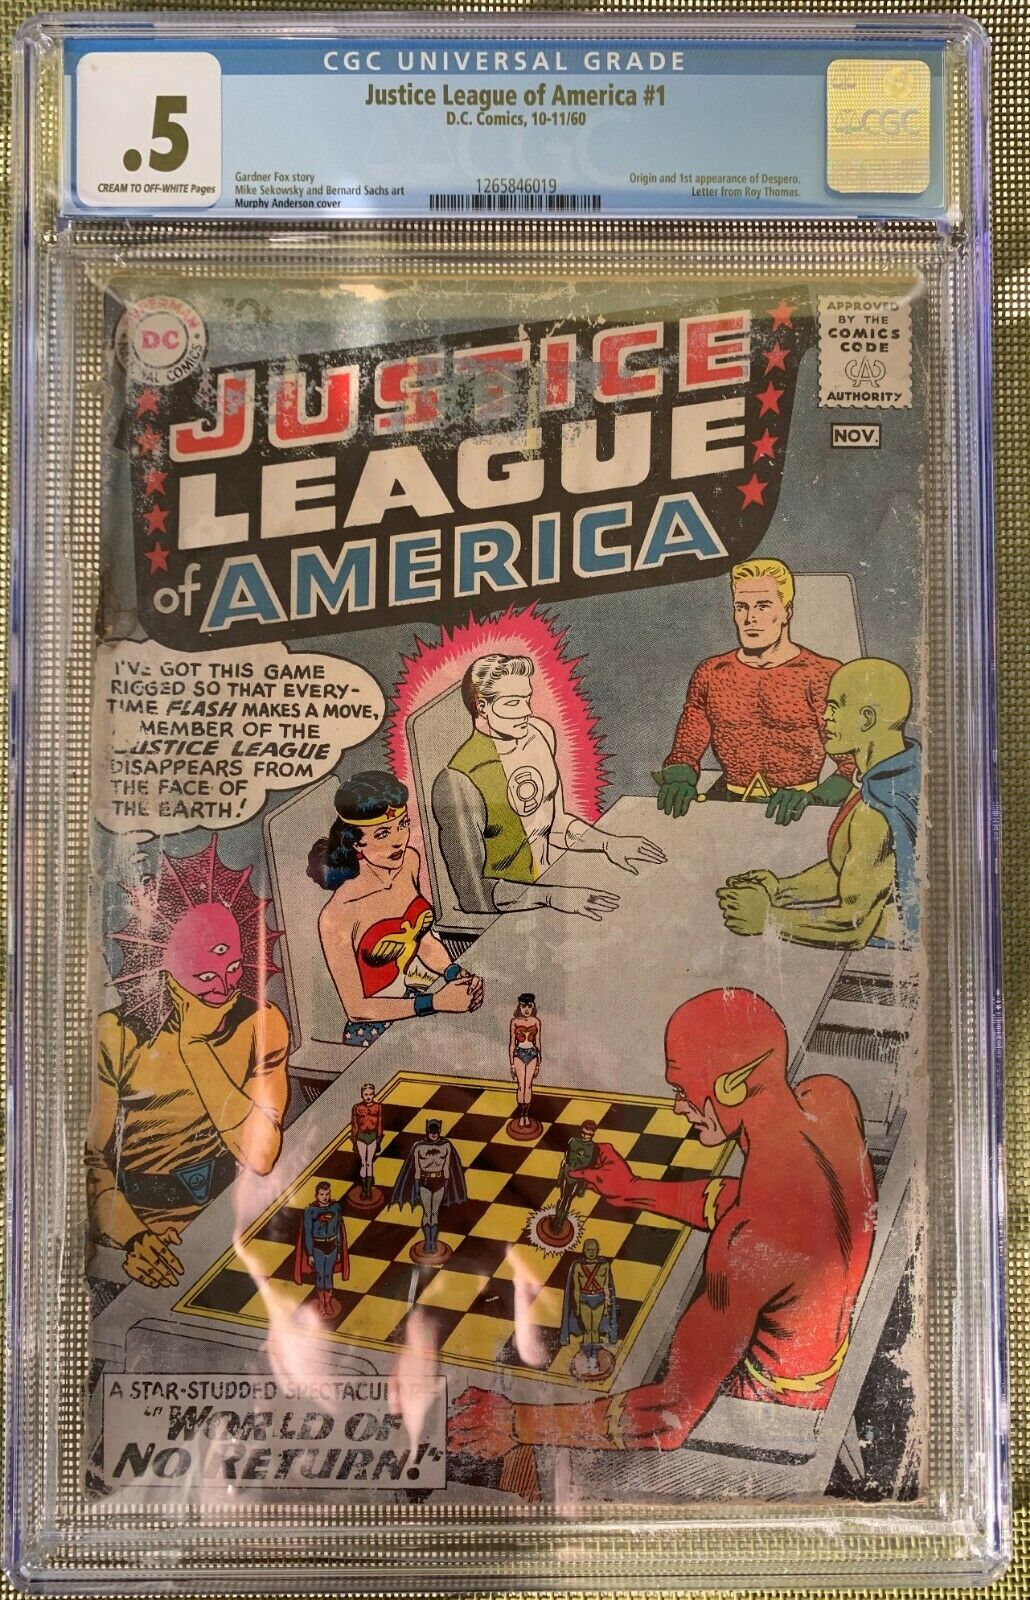 Justice League of America #1 CGC 0.5 cr/ow